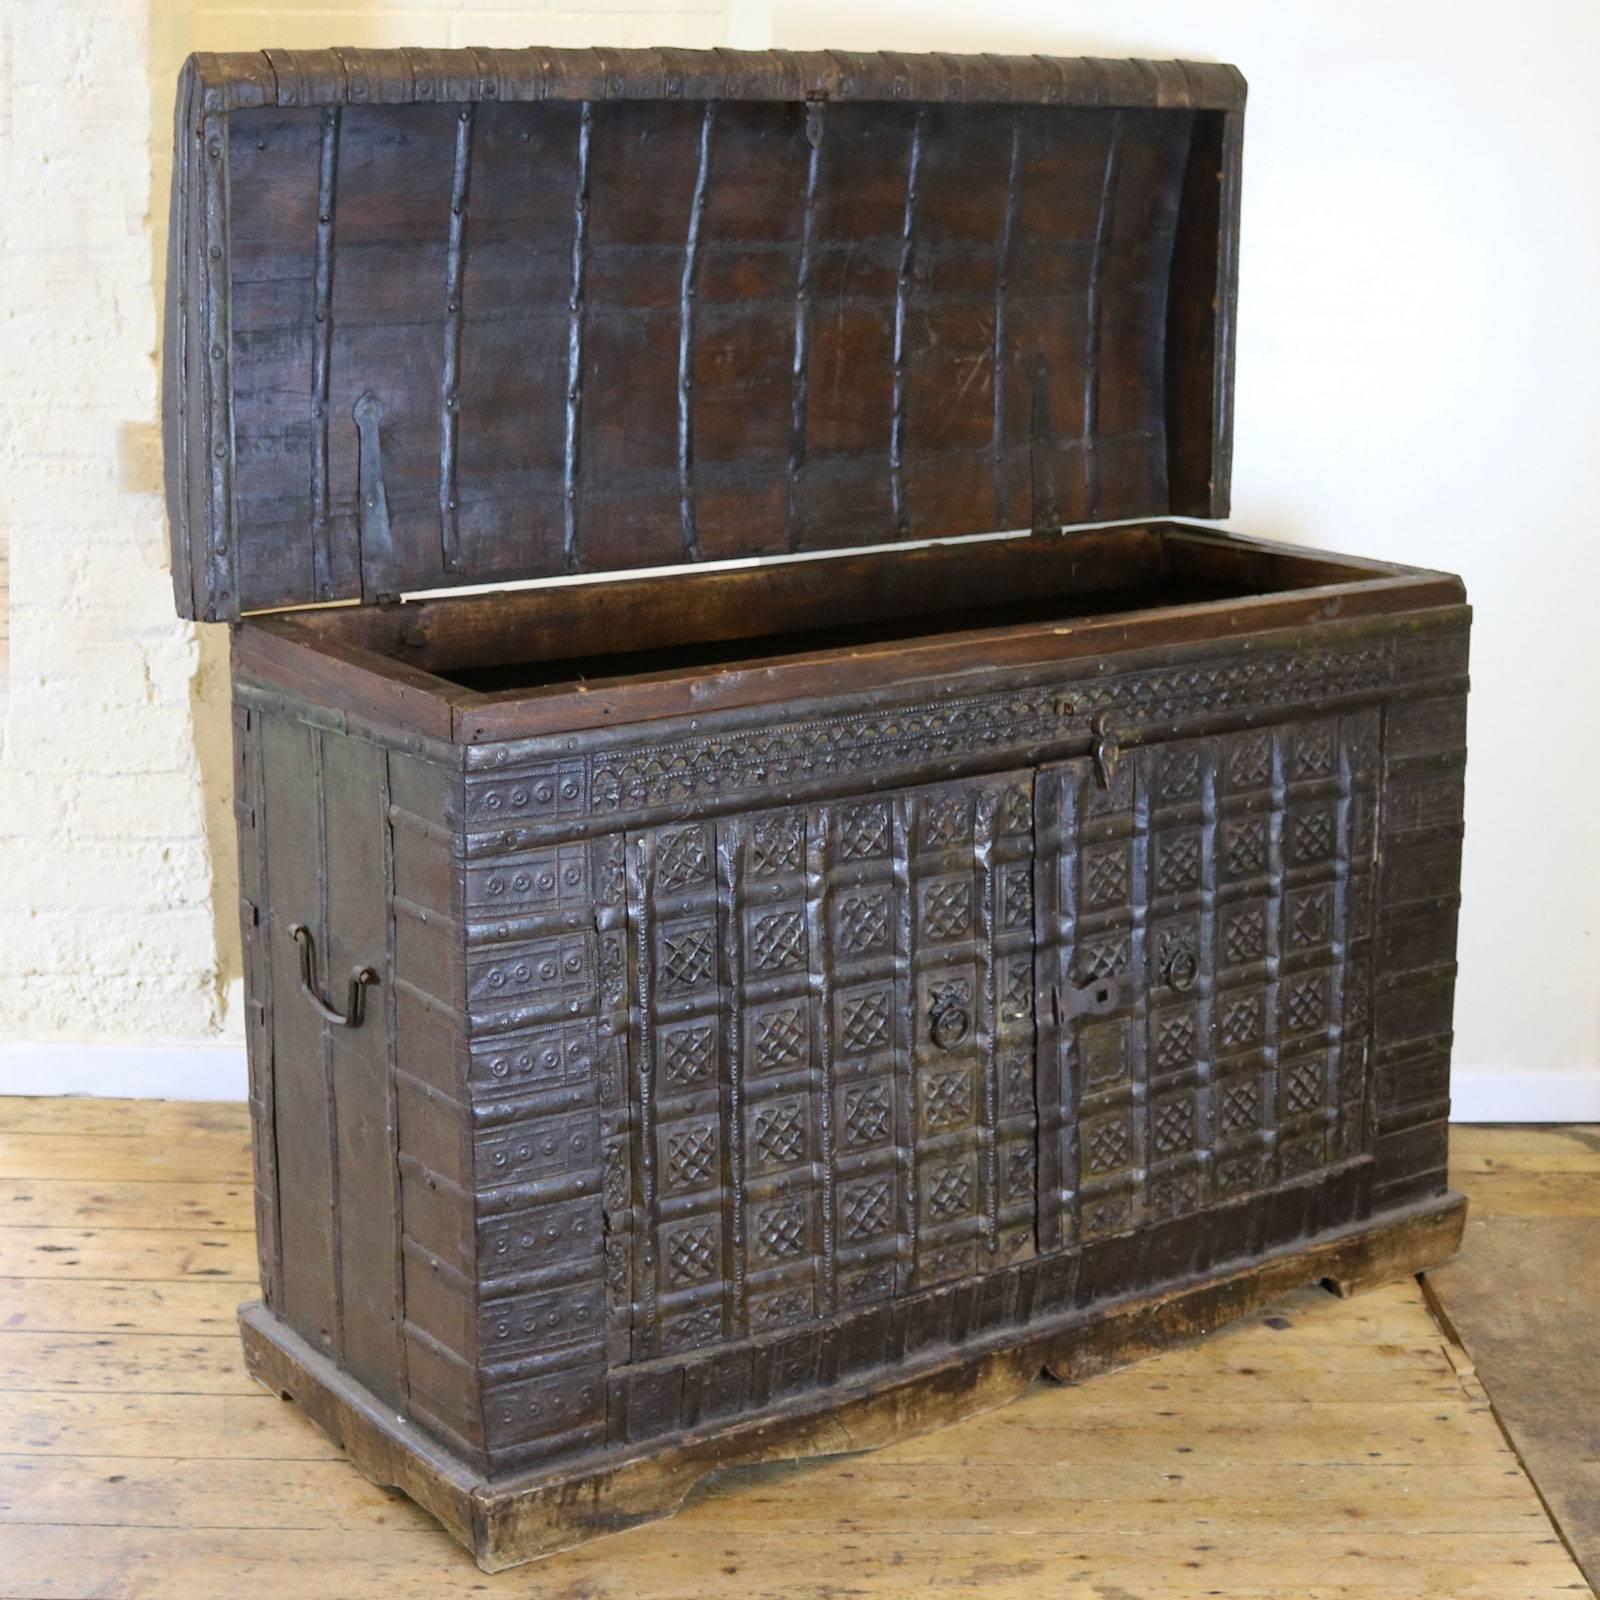 A decorative Moroccan chest with pressed metal decoration.